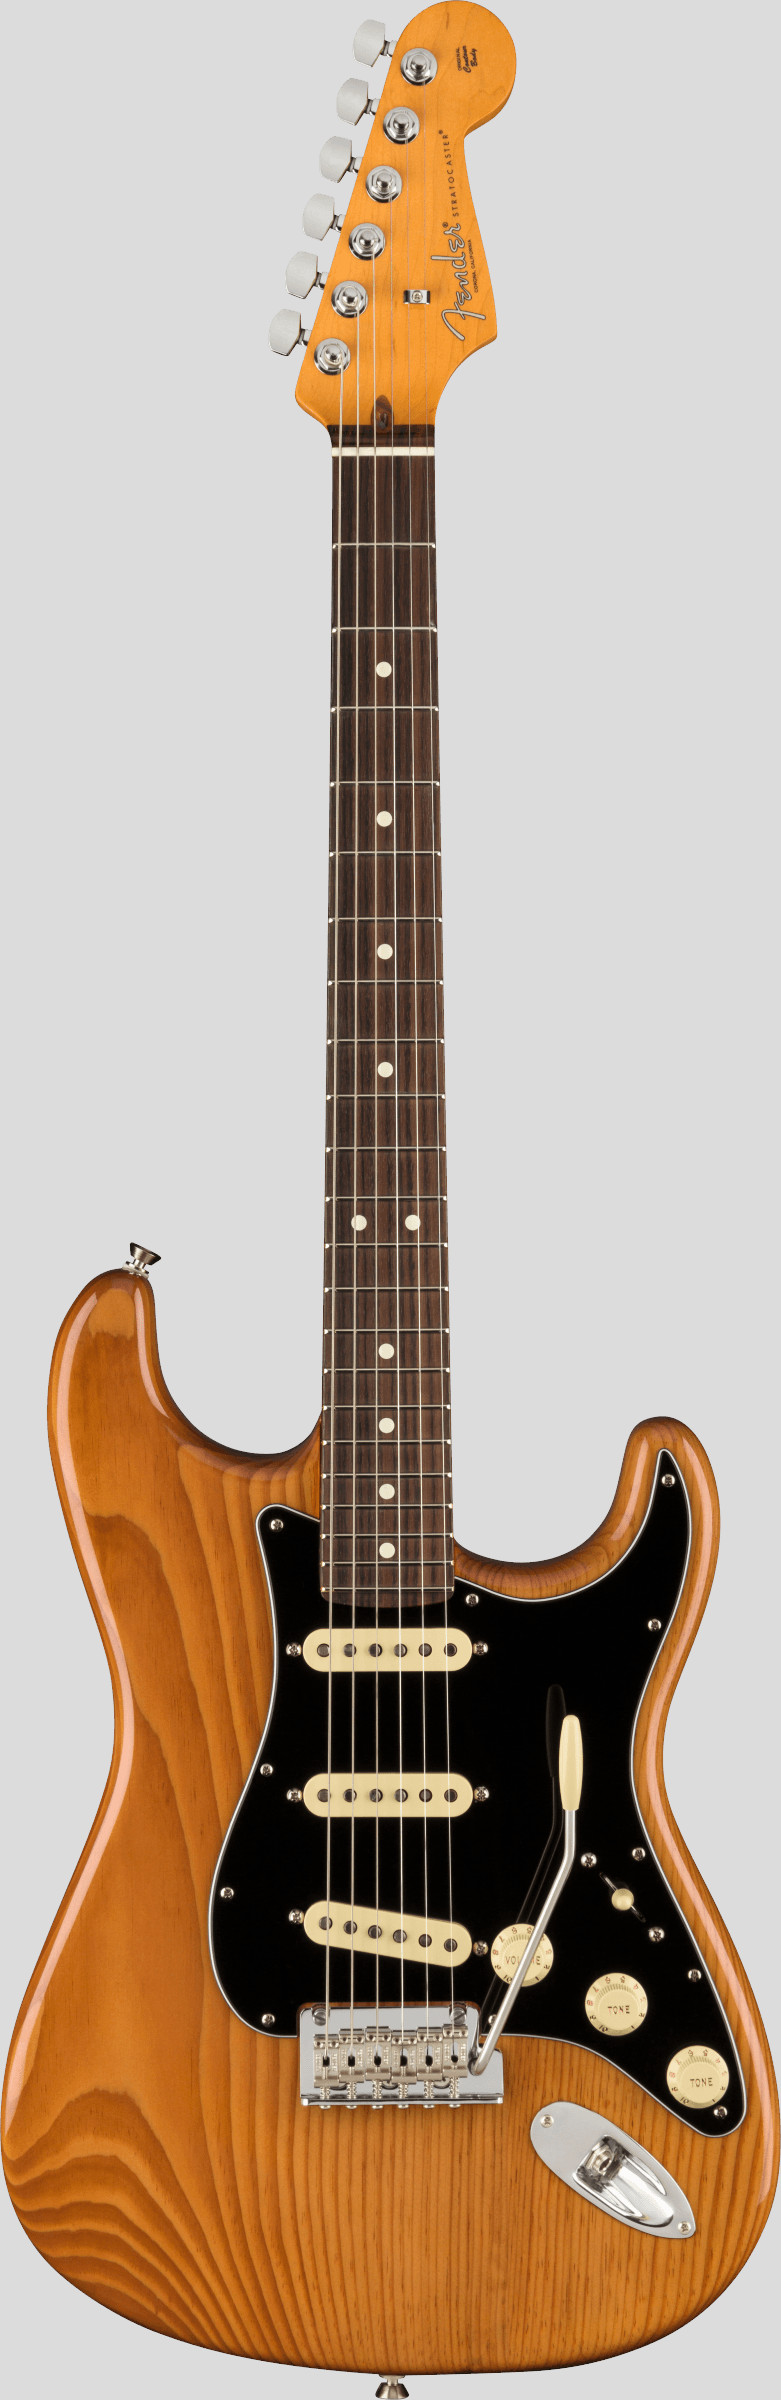 Fender American Professional II Stratocaster Roasted Pine RW 1